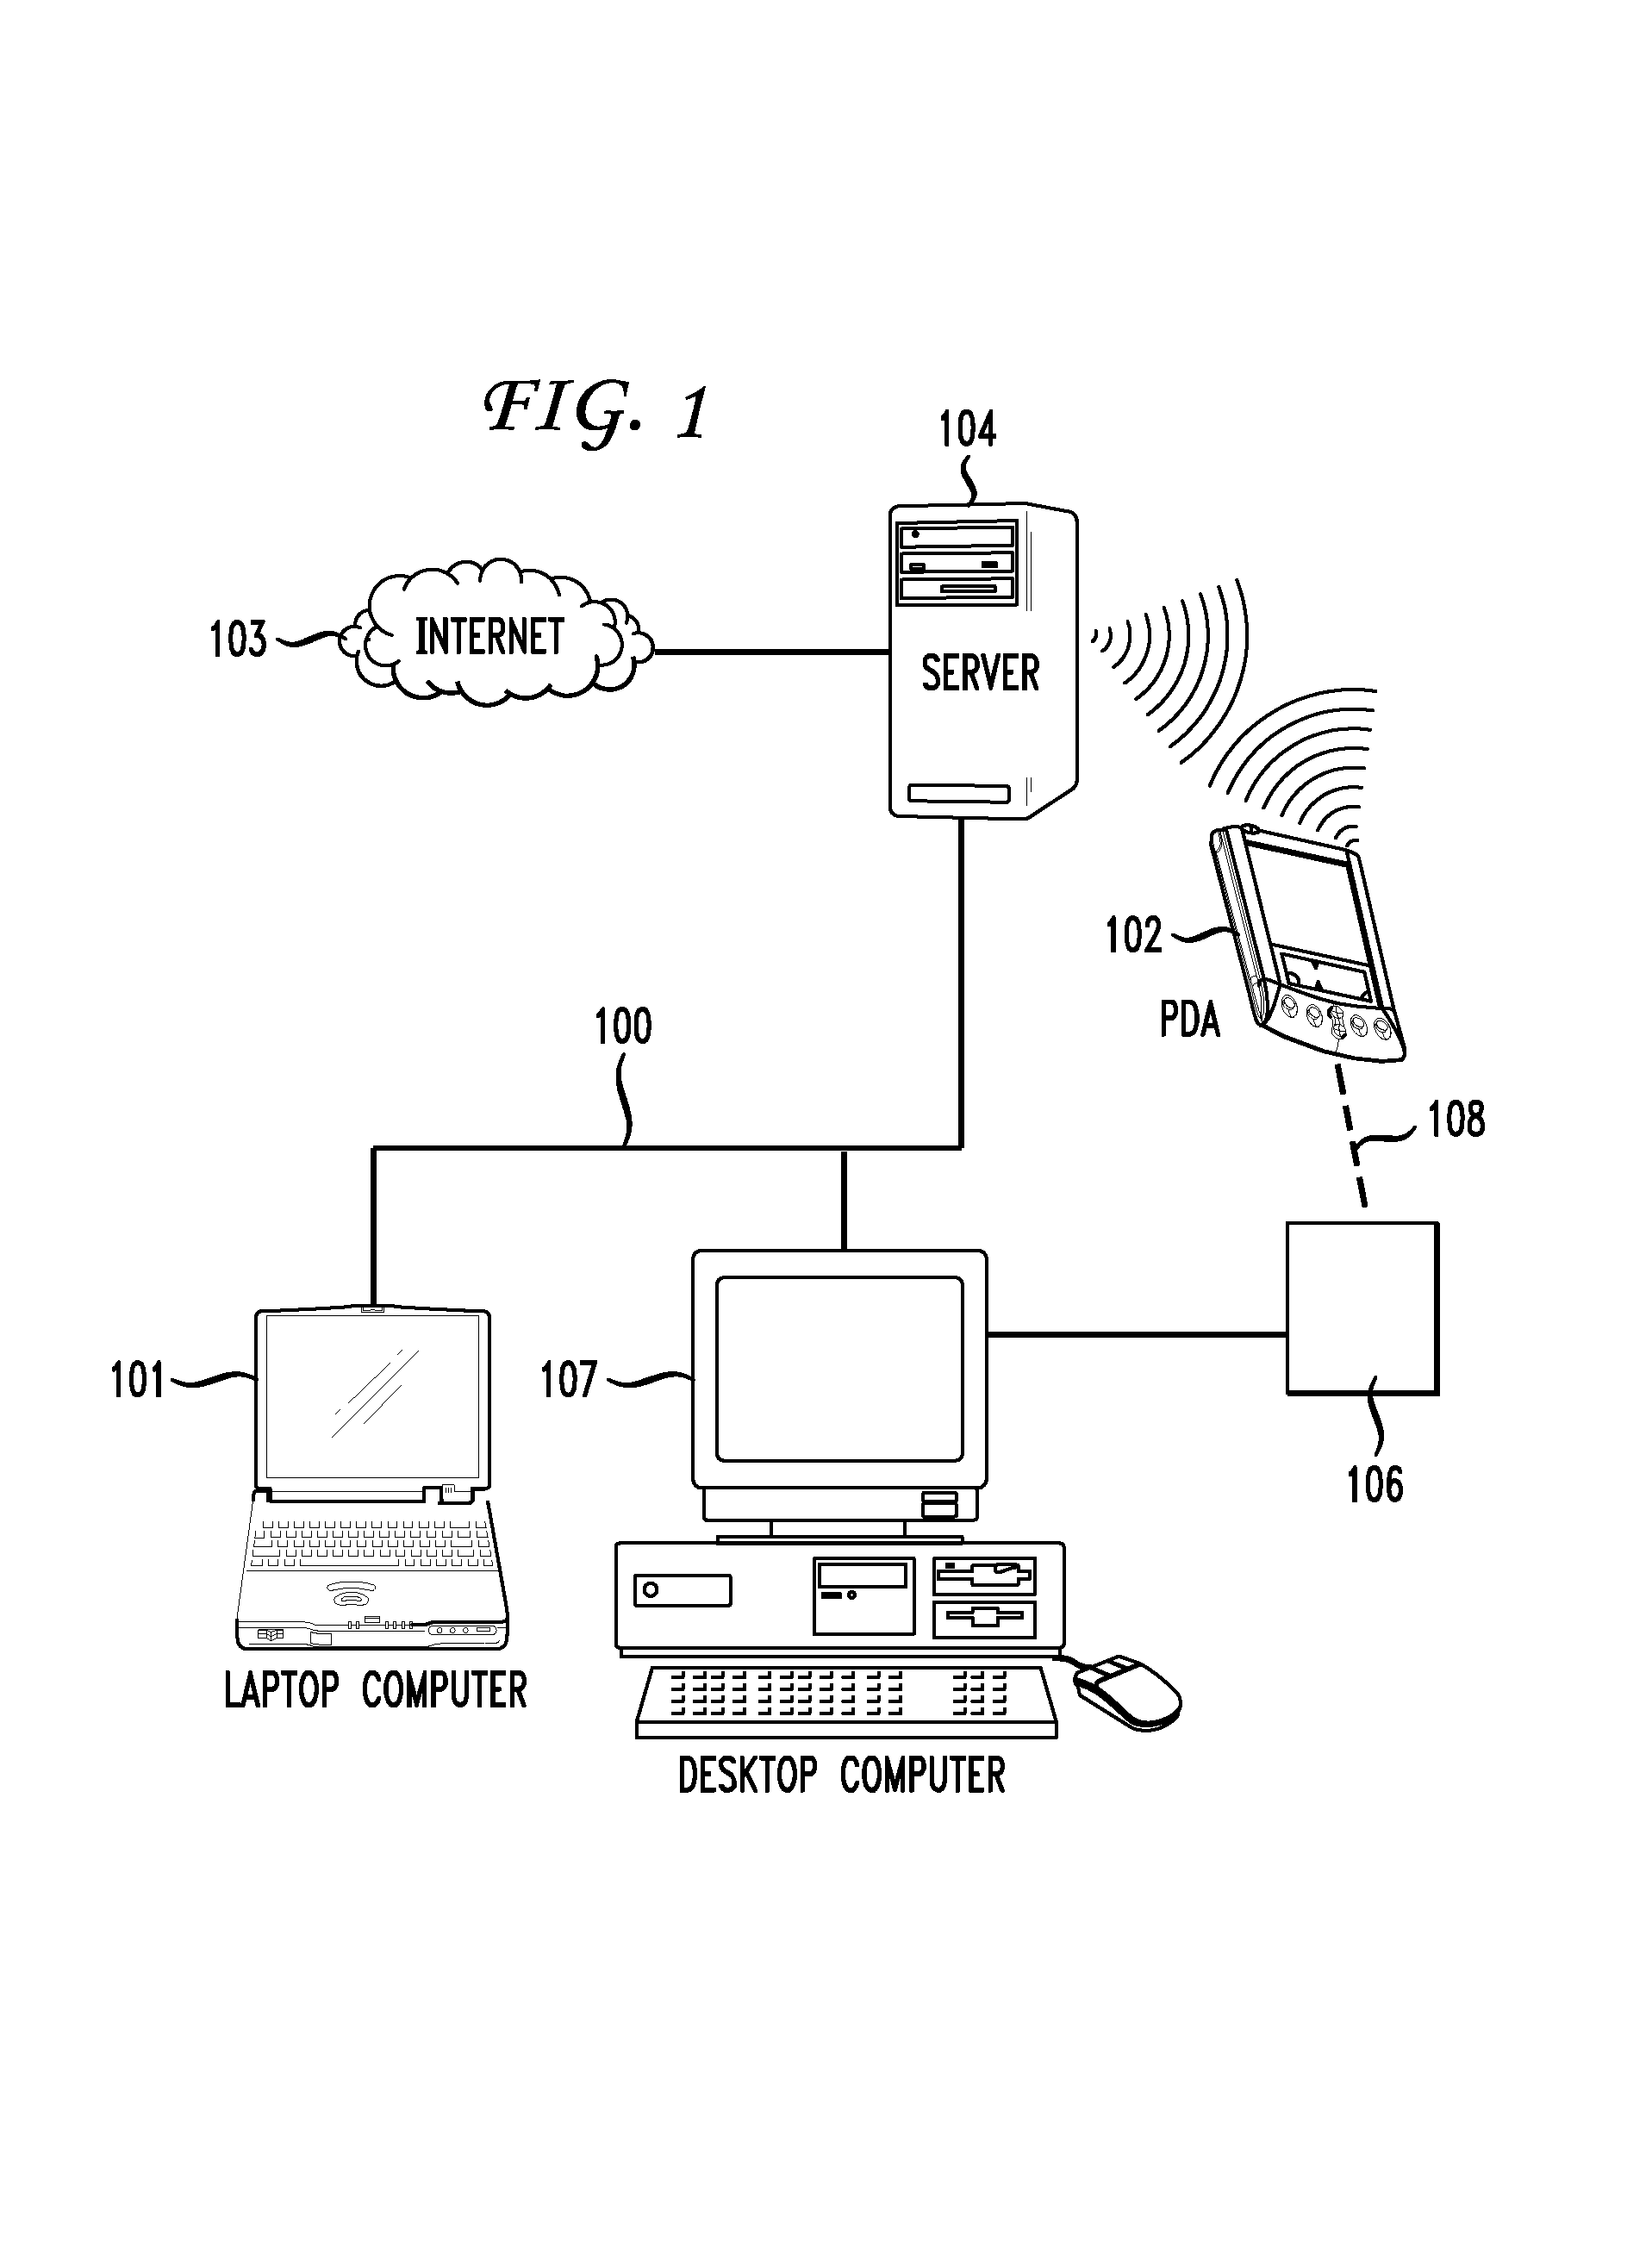 Web-based task assistants for wireless personal devices